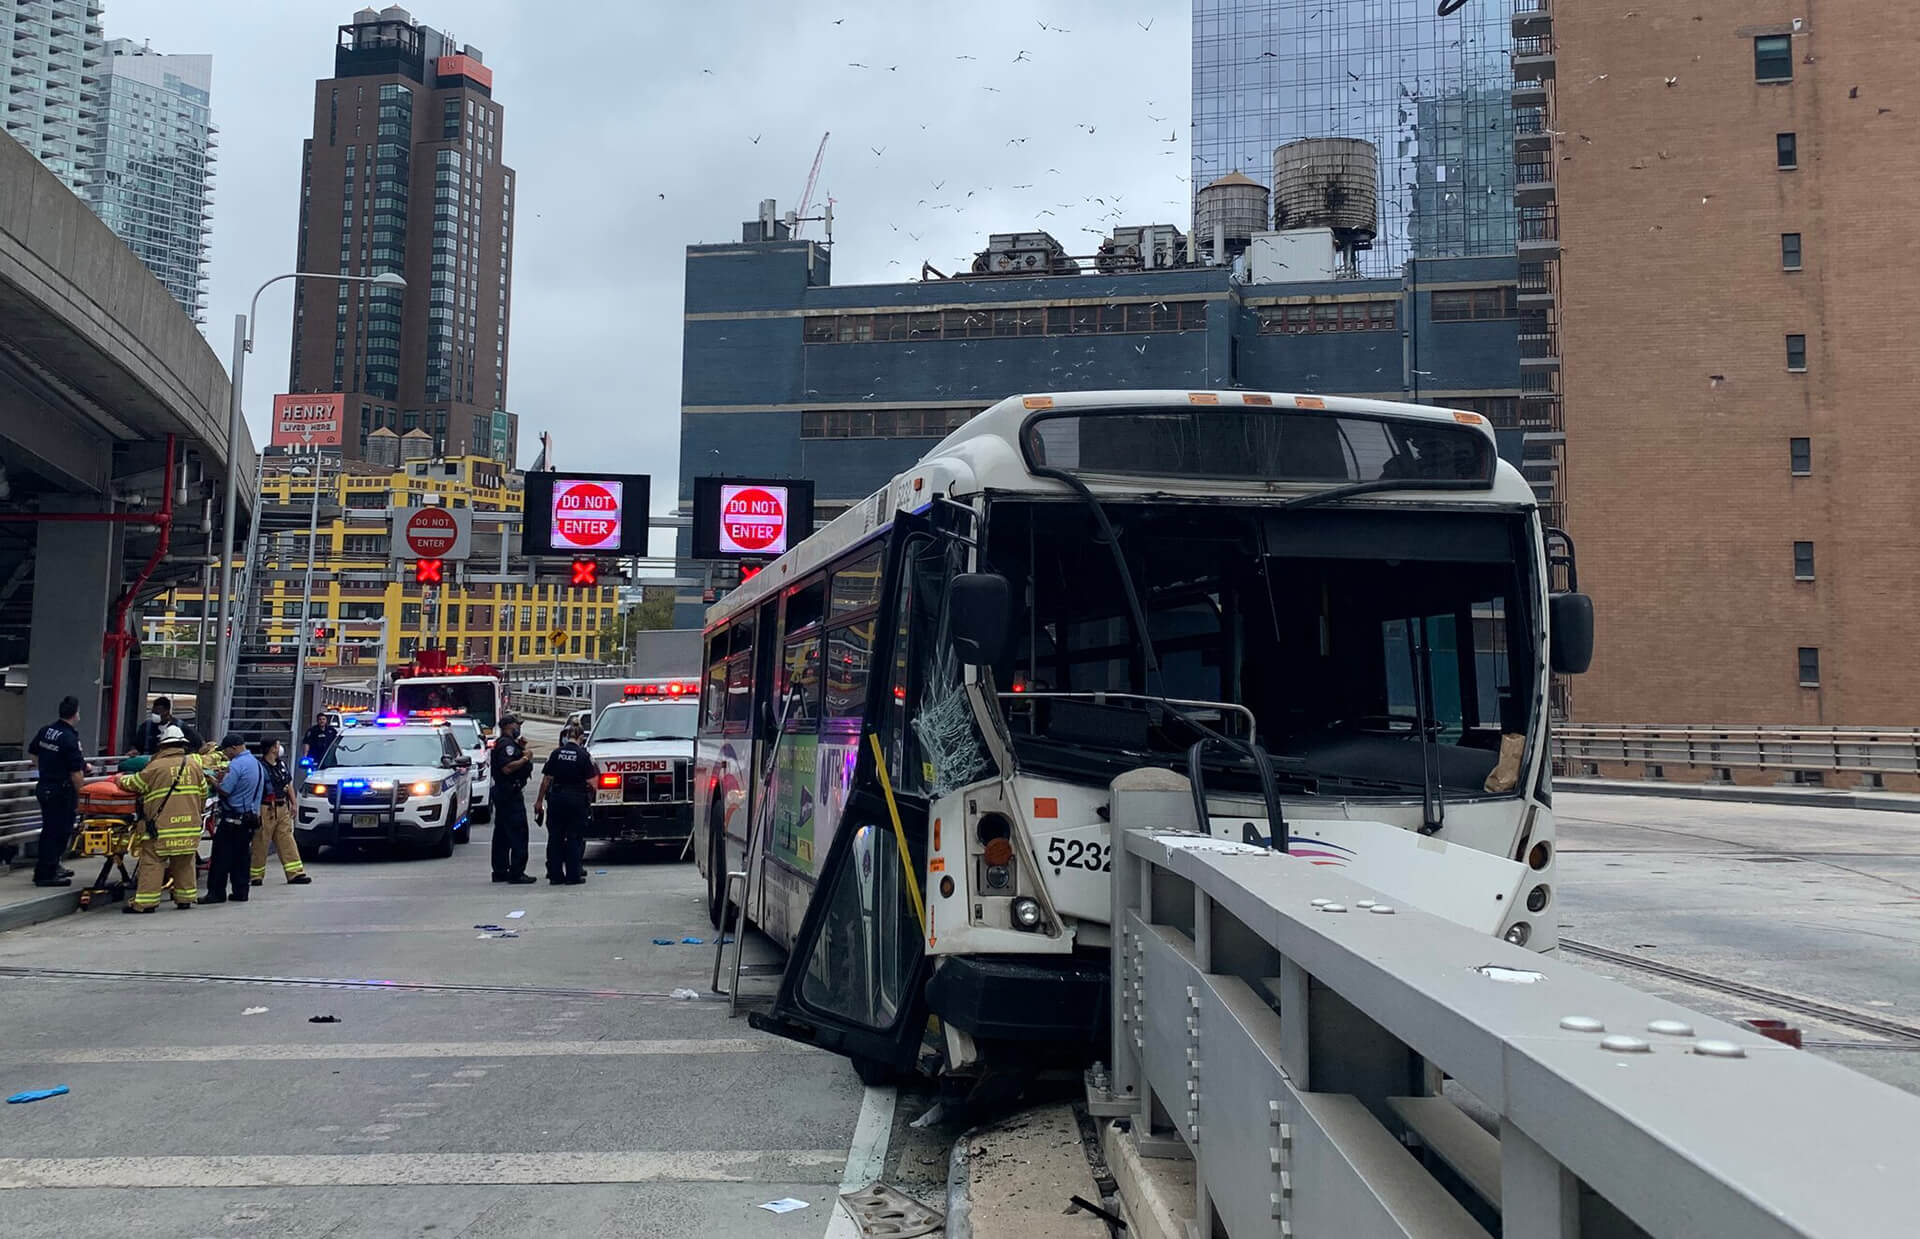 City Bus with Accident Damage